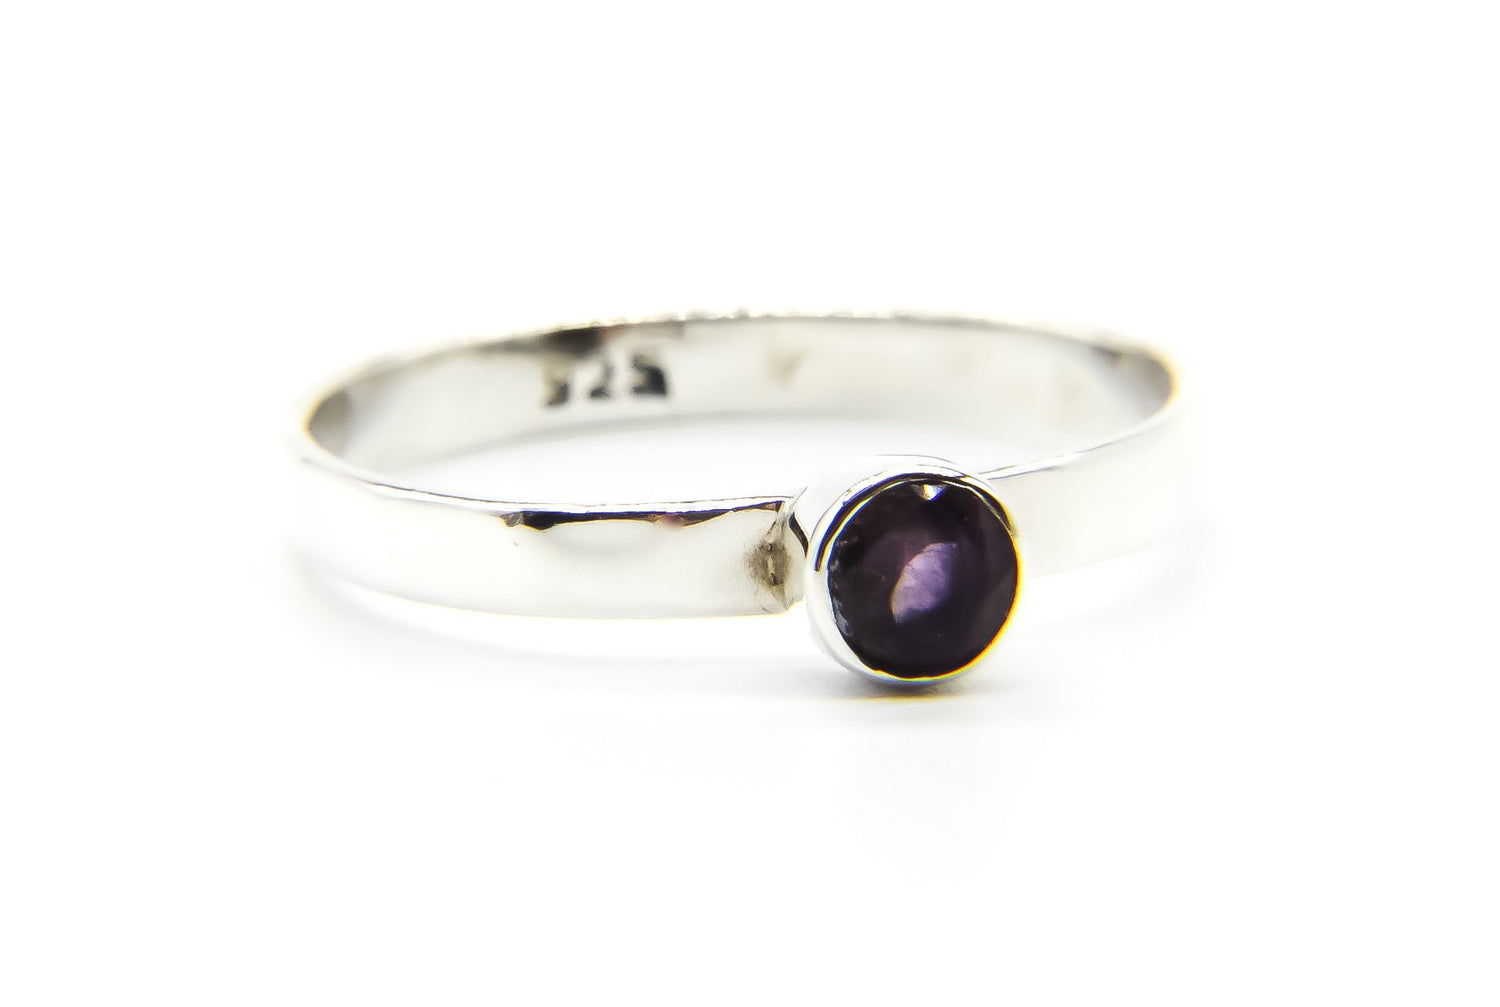 Close-up of Silver Ring with 925 stamp showing. Ring has purple amethyst stone